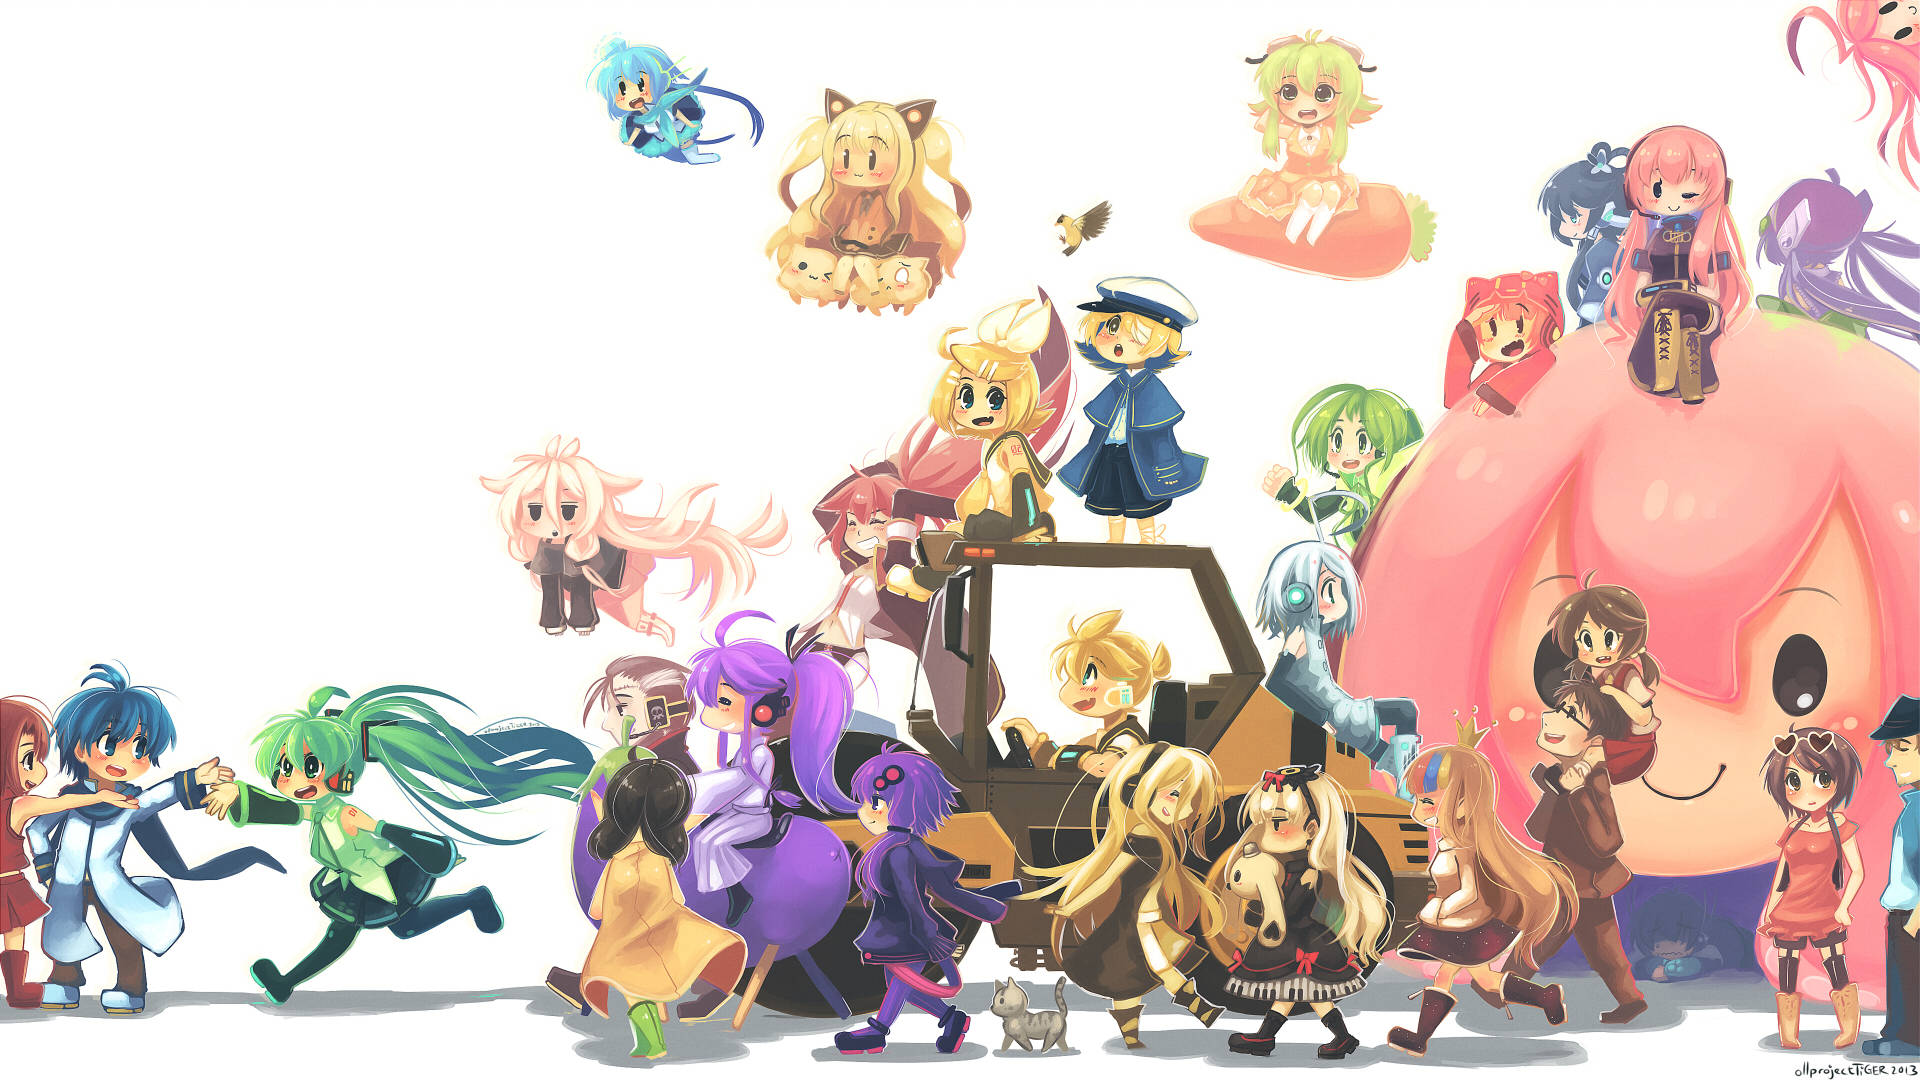 A colorful and cheerful scene featuring the beloved Vocaloid character Wallpaper